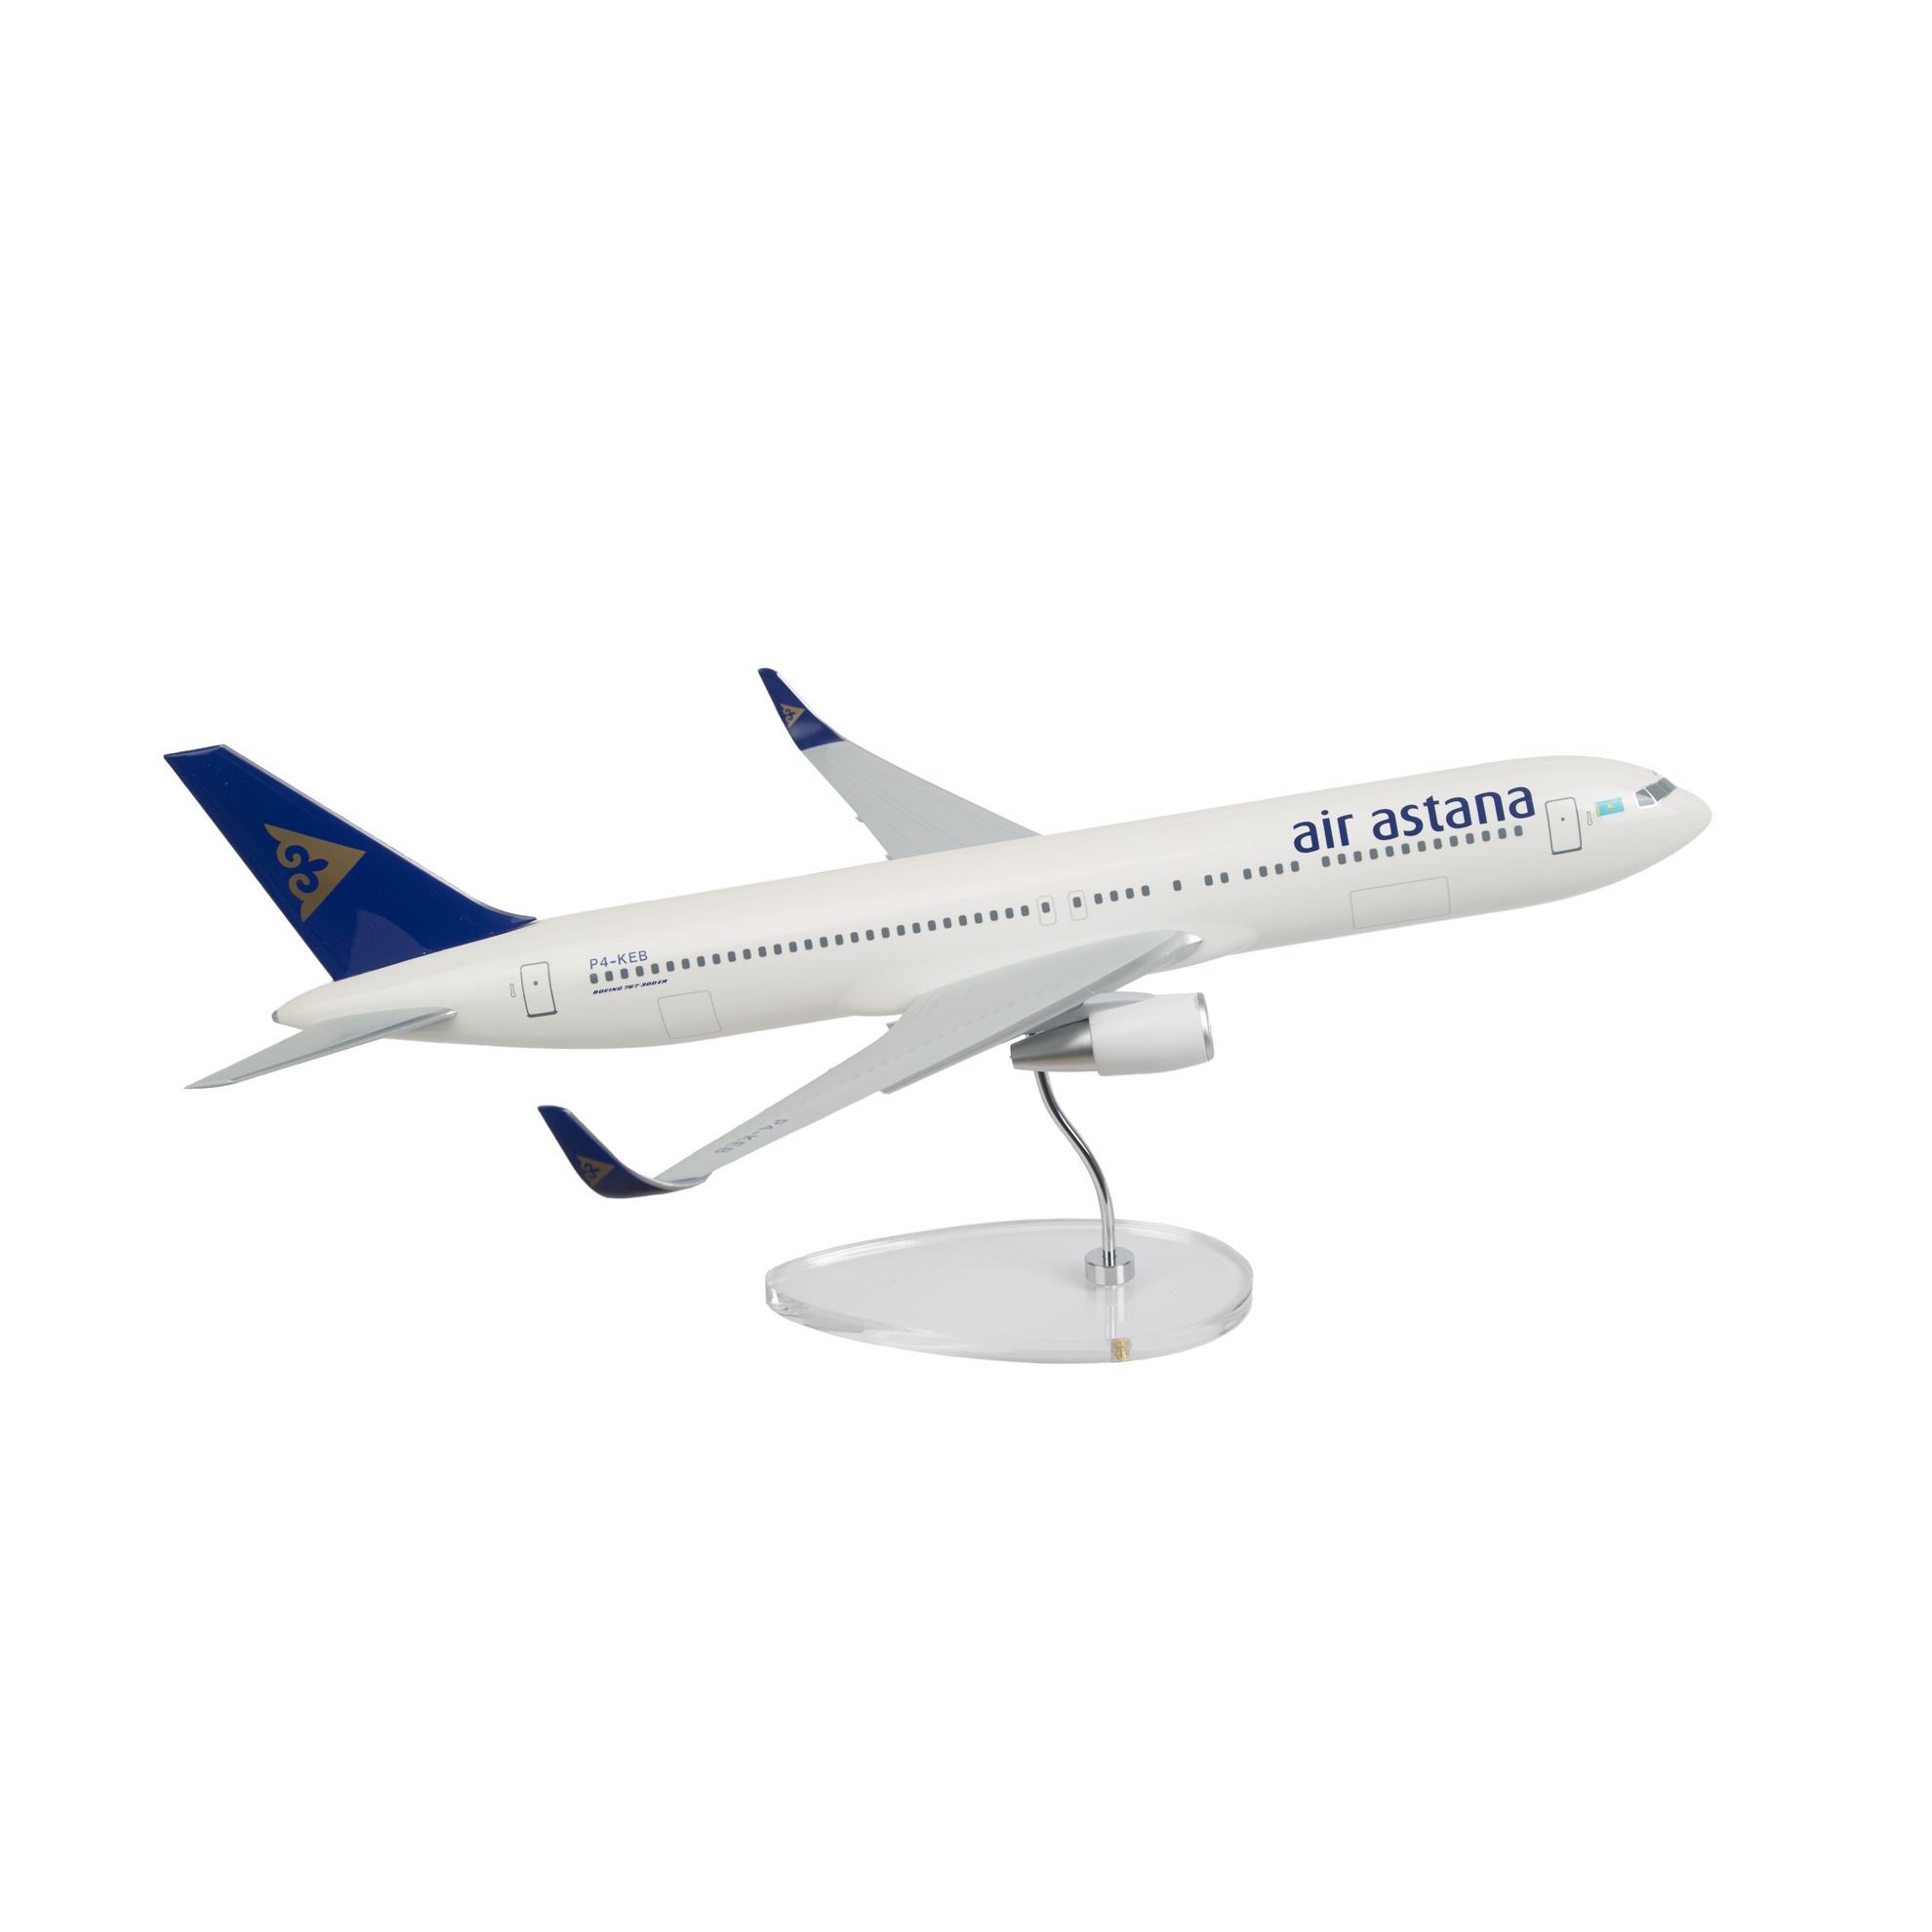 Picture of Вoeing 767-300ER (1:100) aircraft model